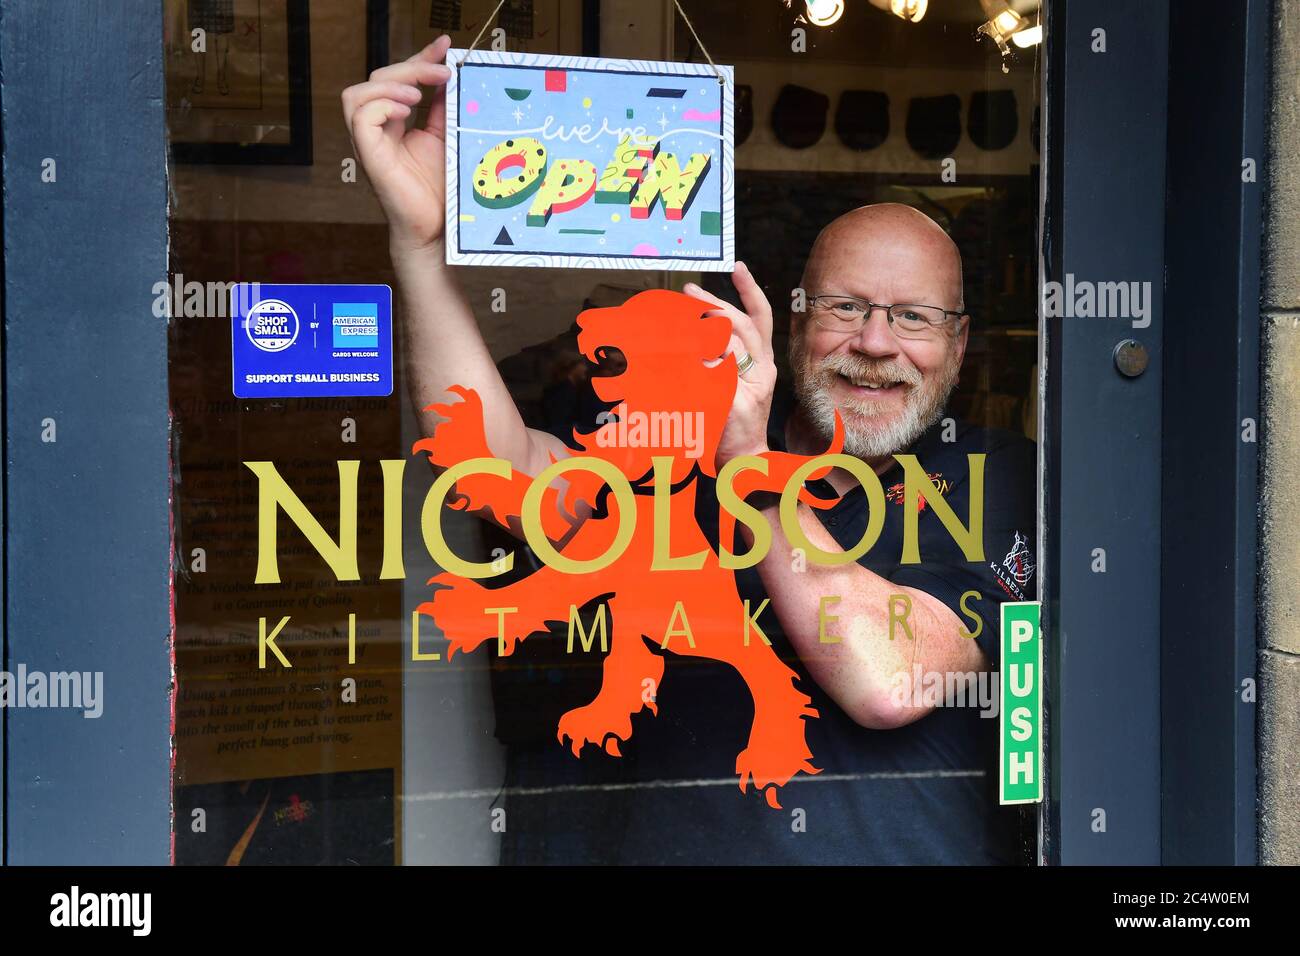 EDITORIAL USE ONLY Gordon Nicolson from Nicolson Kiltmakers in Edinburgh displays a “WE'RE OPEN” sign designed by artist Yukai Du, which has been created to celebrate the American Express Shop Small campaign and to help Scottish retailers welcome people back to our high streets. Stock Photo